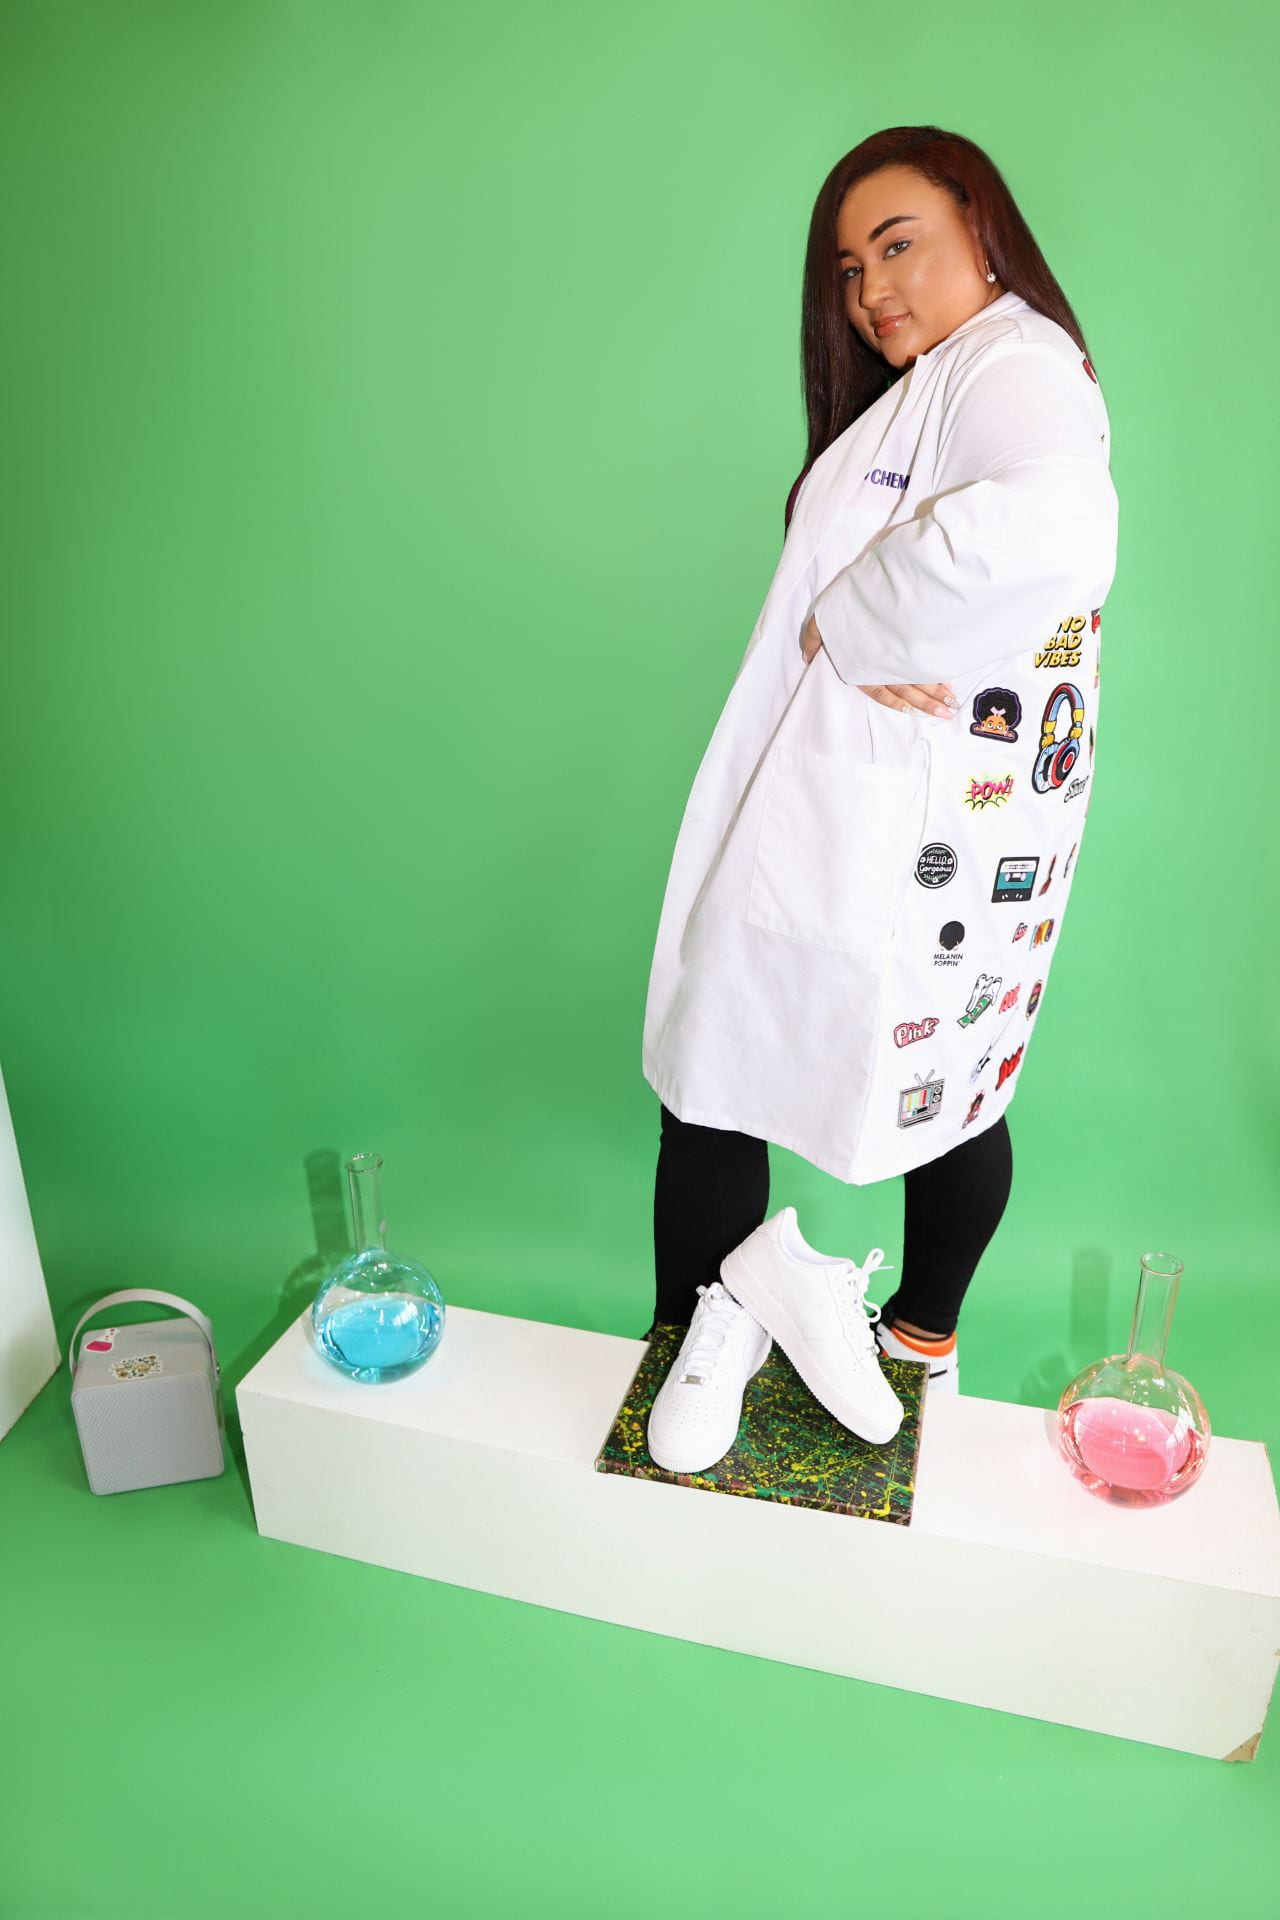 Picture of Jakyra Simpson wearing a lab coat, posing with sneakers and chemistry beakers. 